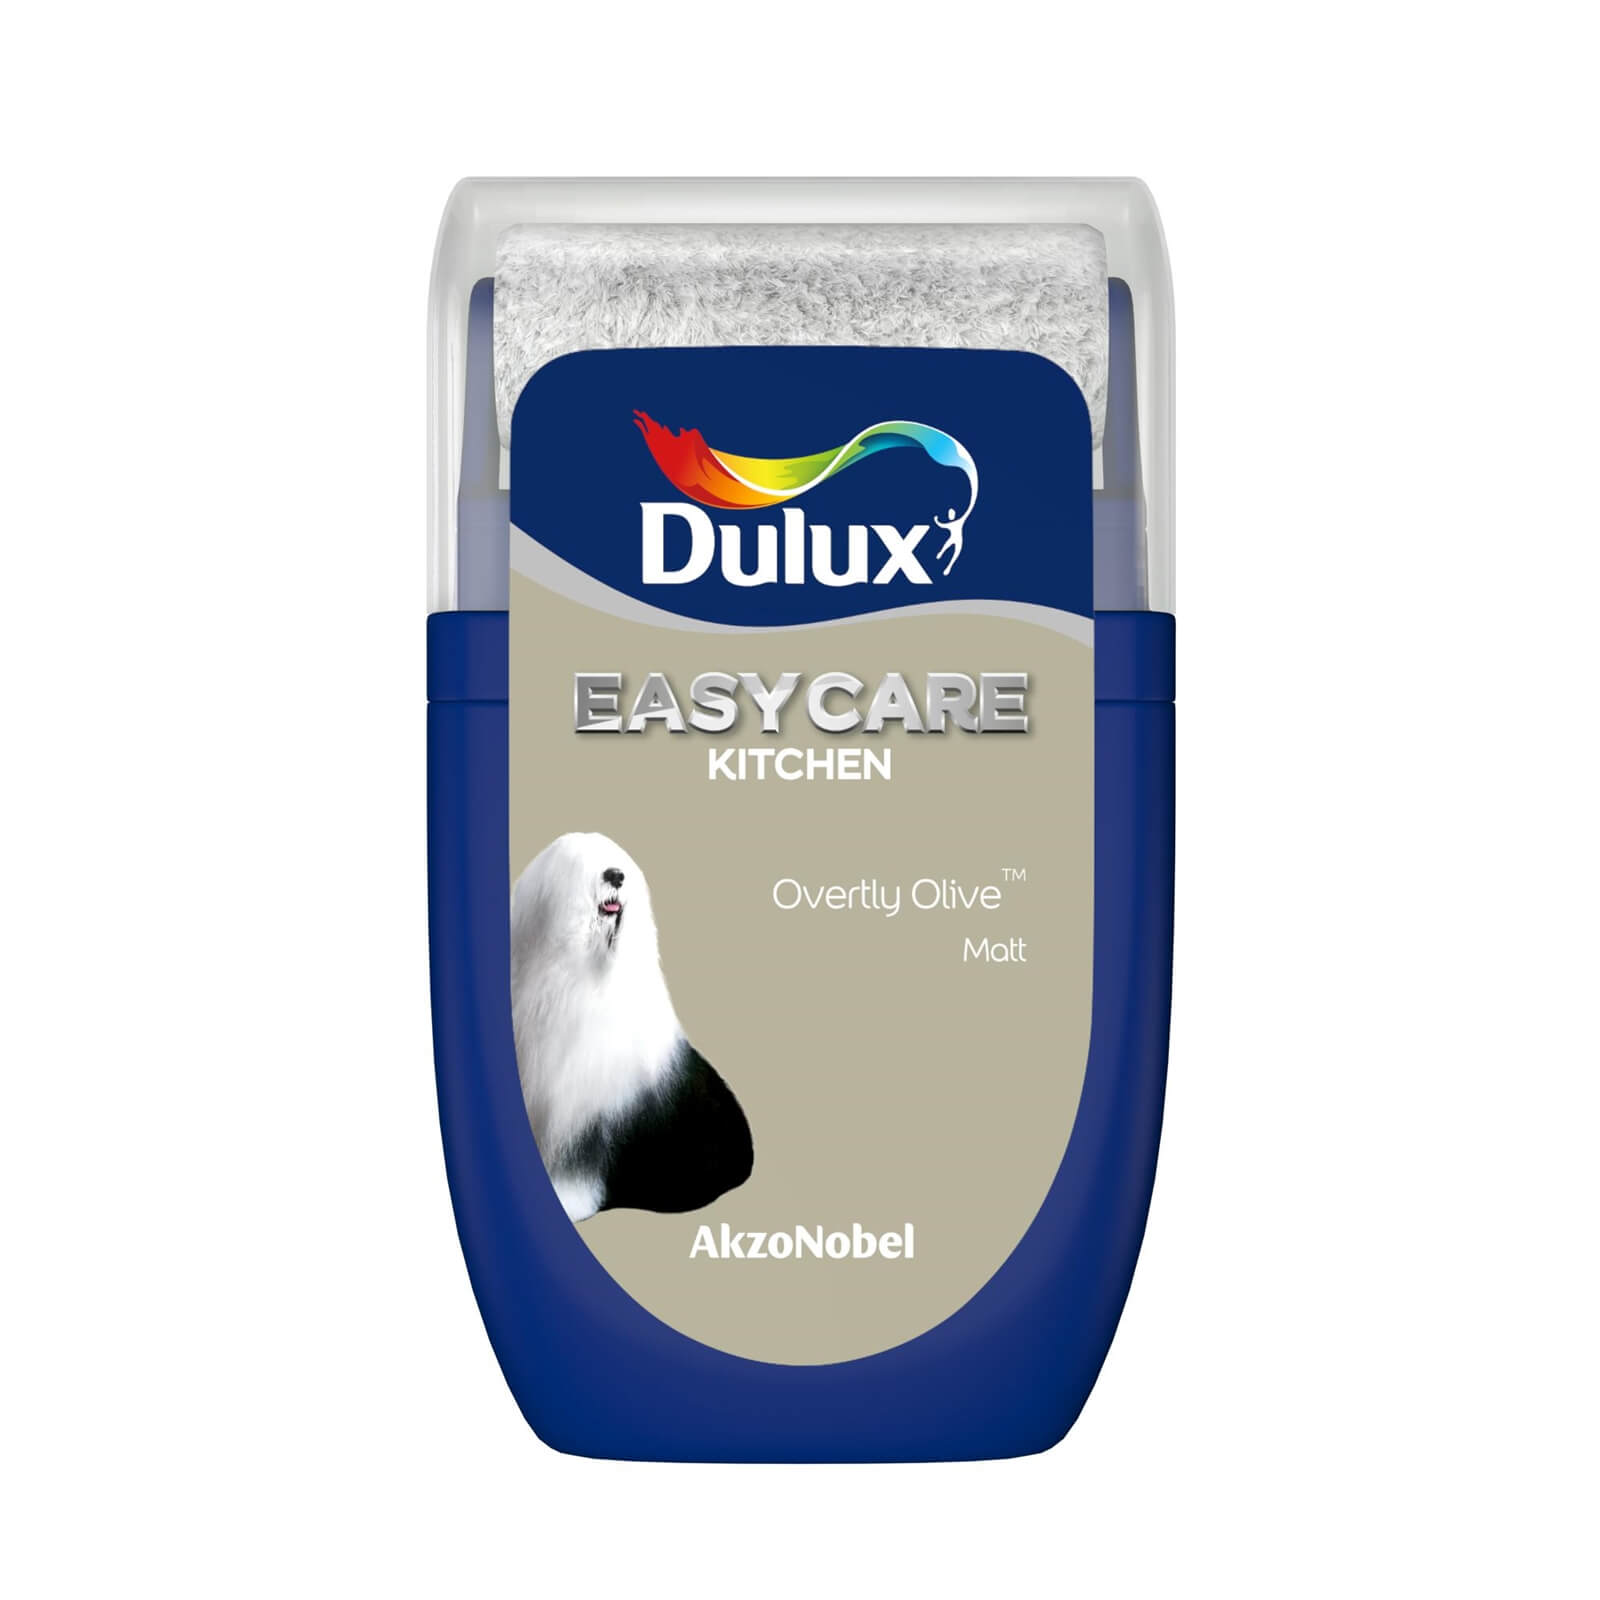 Dulux Easycare Kitchen Overtly Olive Tester Paint - 30ml